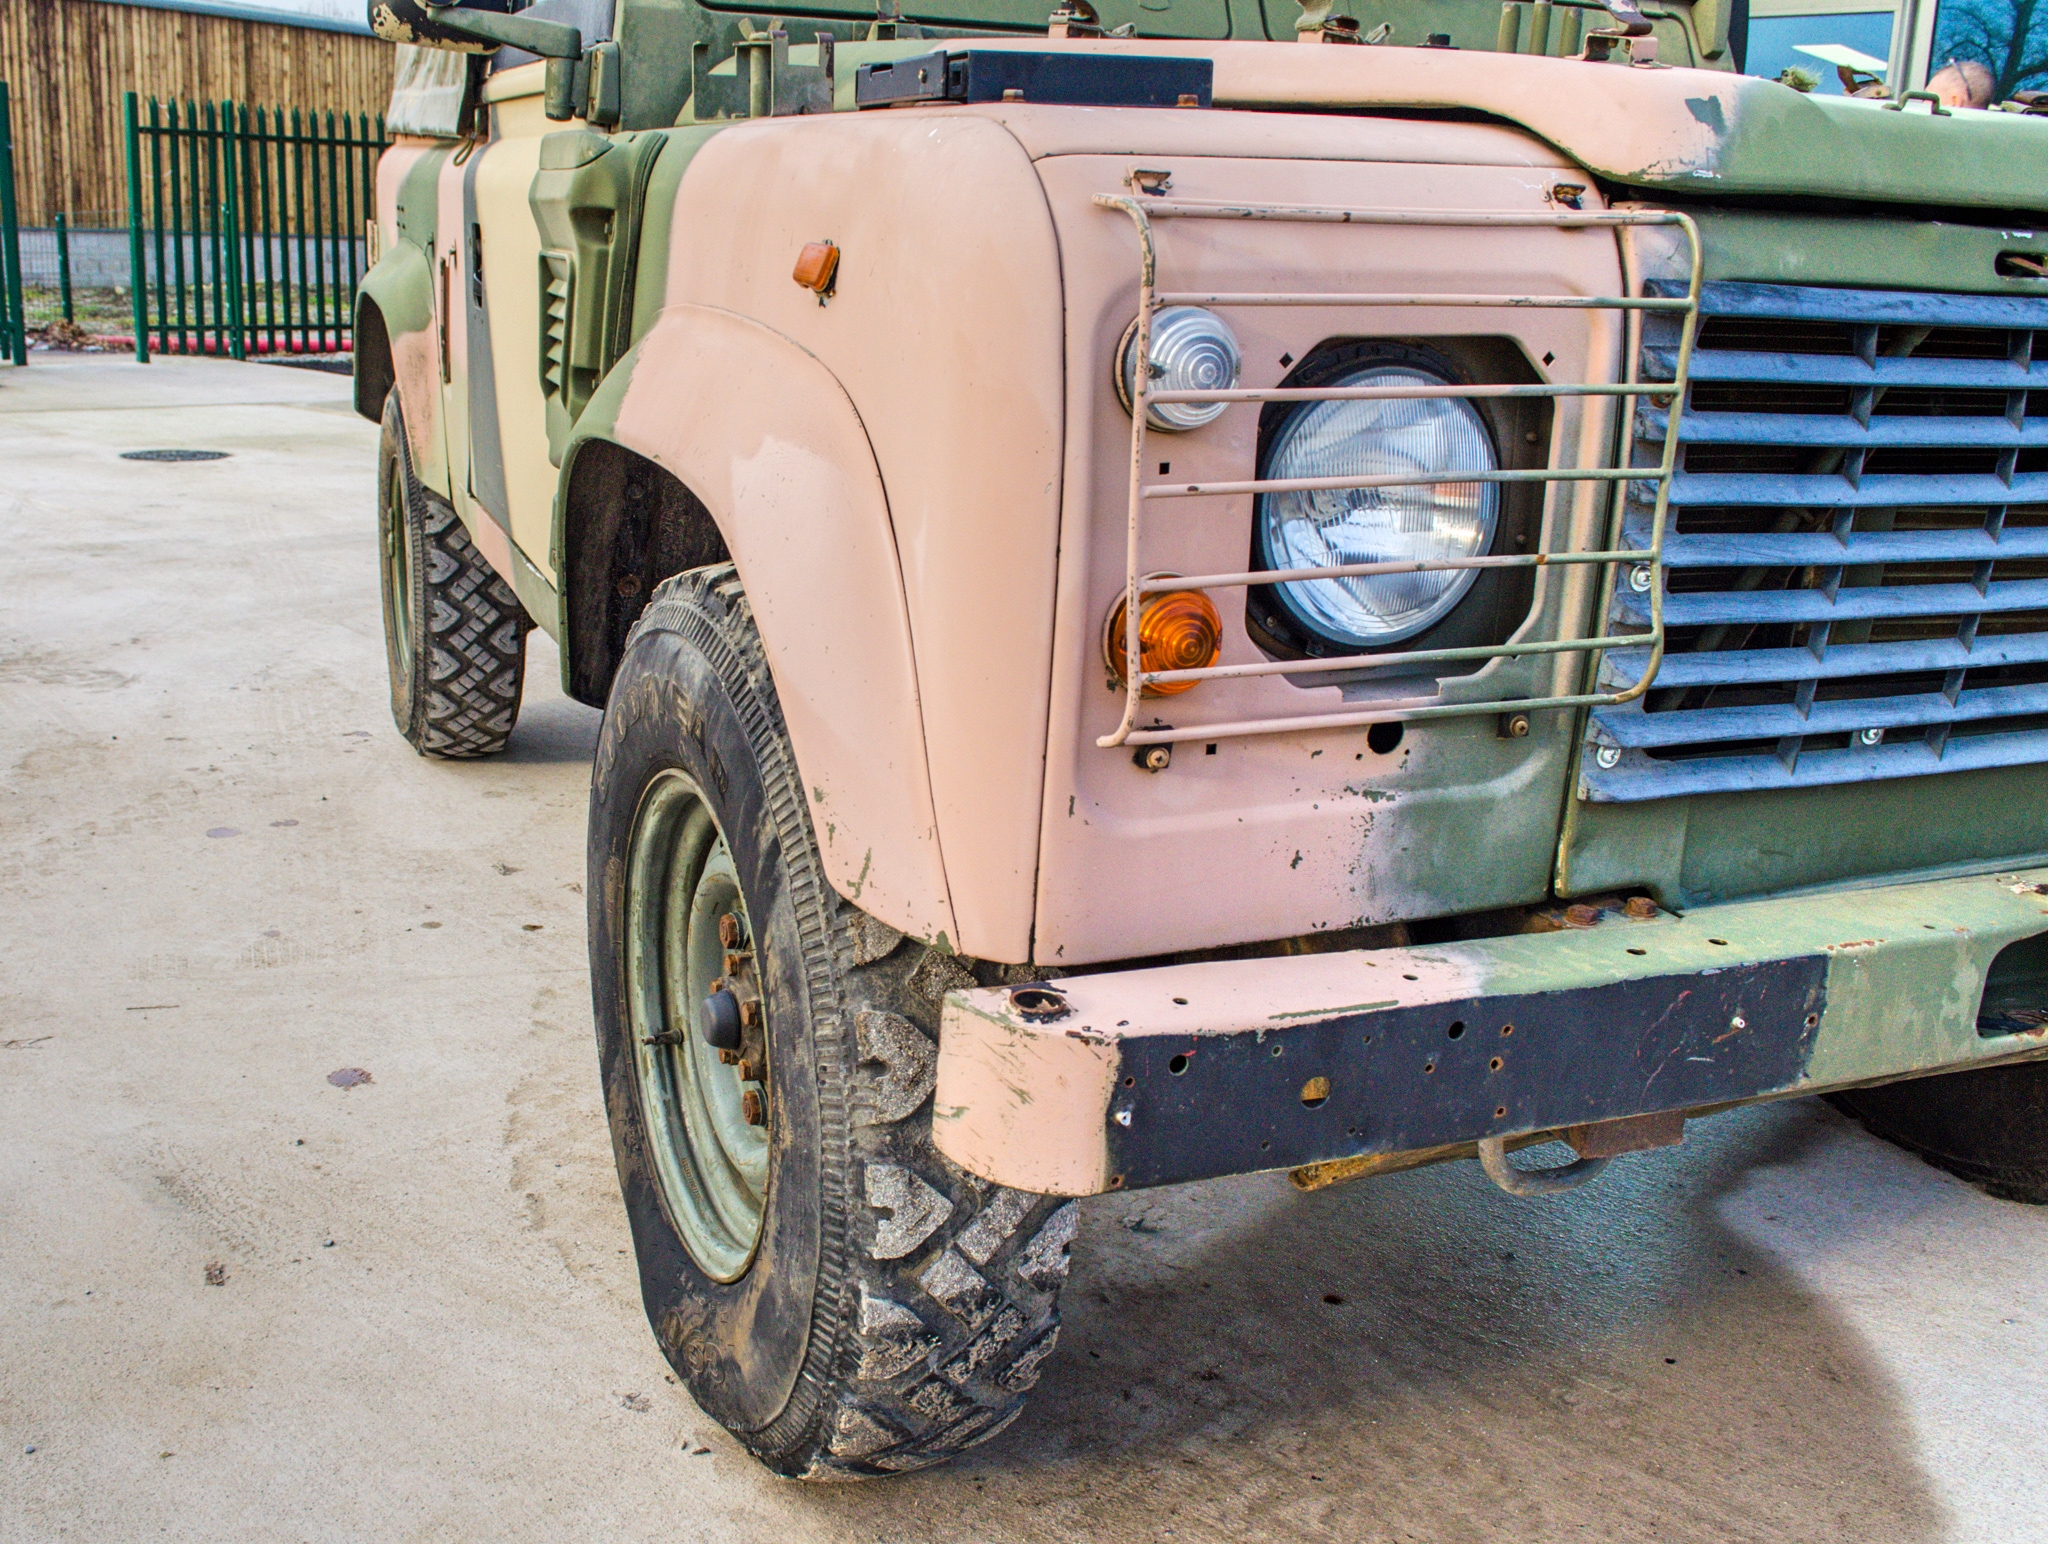 1998 Land Rover Defender 90 WOLF 2,5 litre 300TDI 4 wheel drive utility vehicle Ex MOD - Image 16 of 44